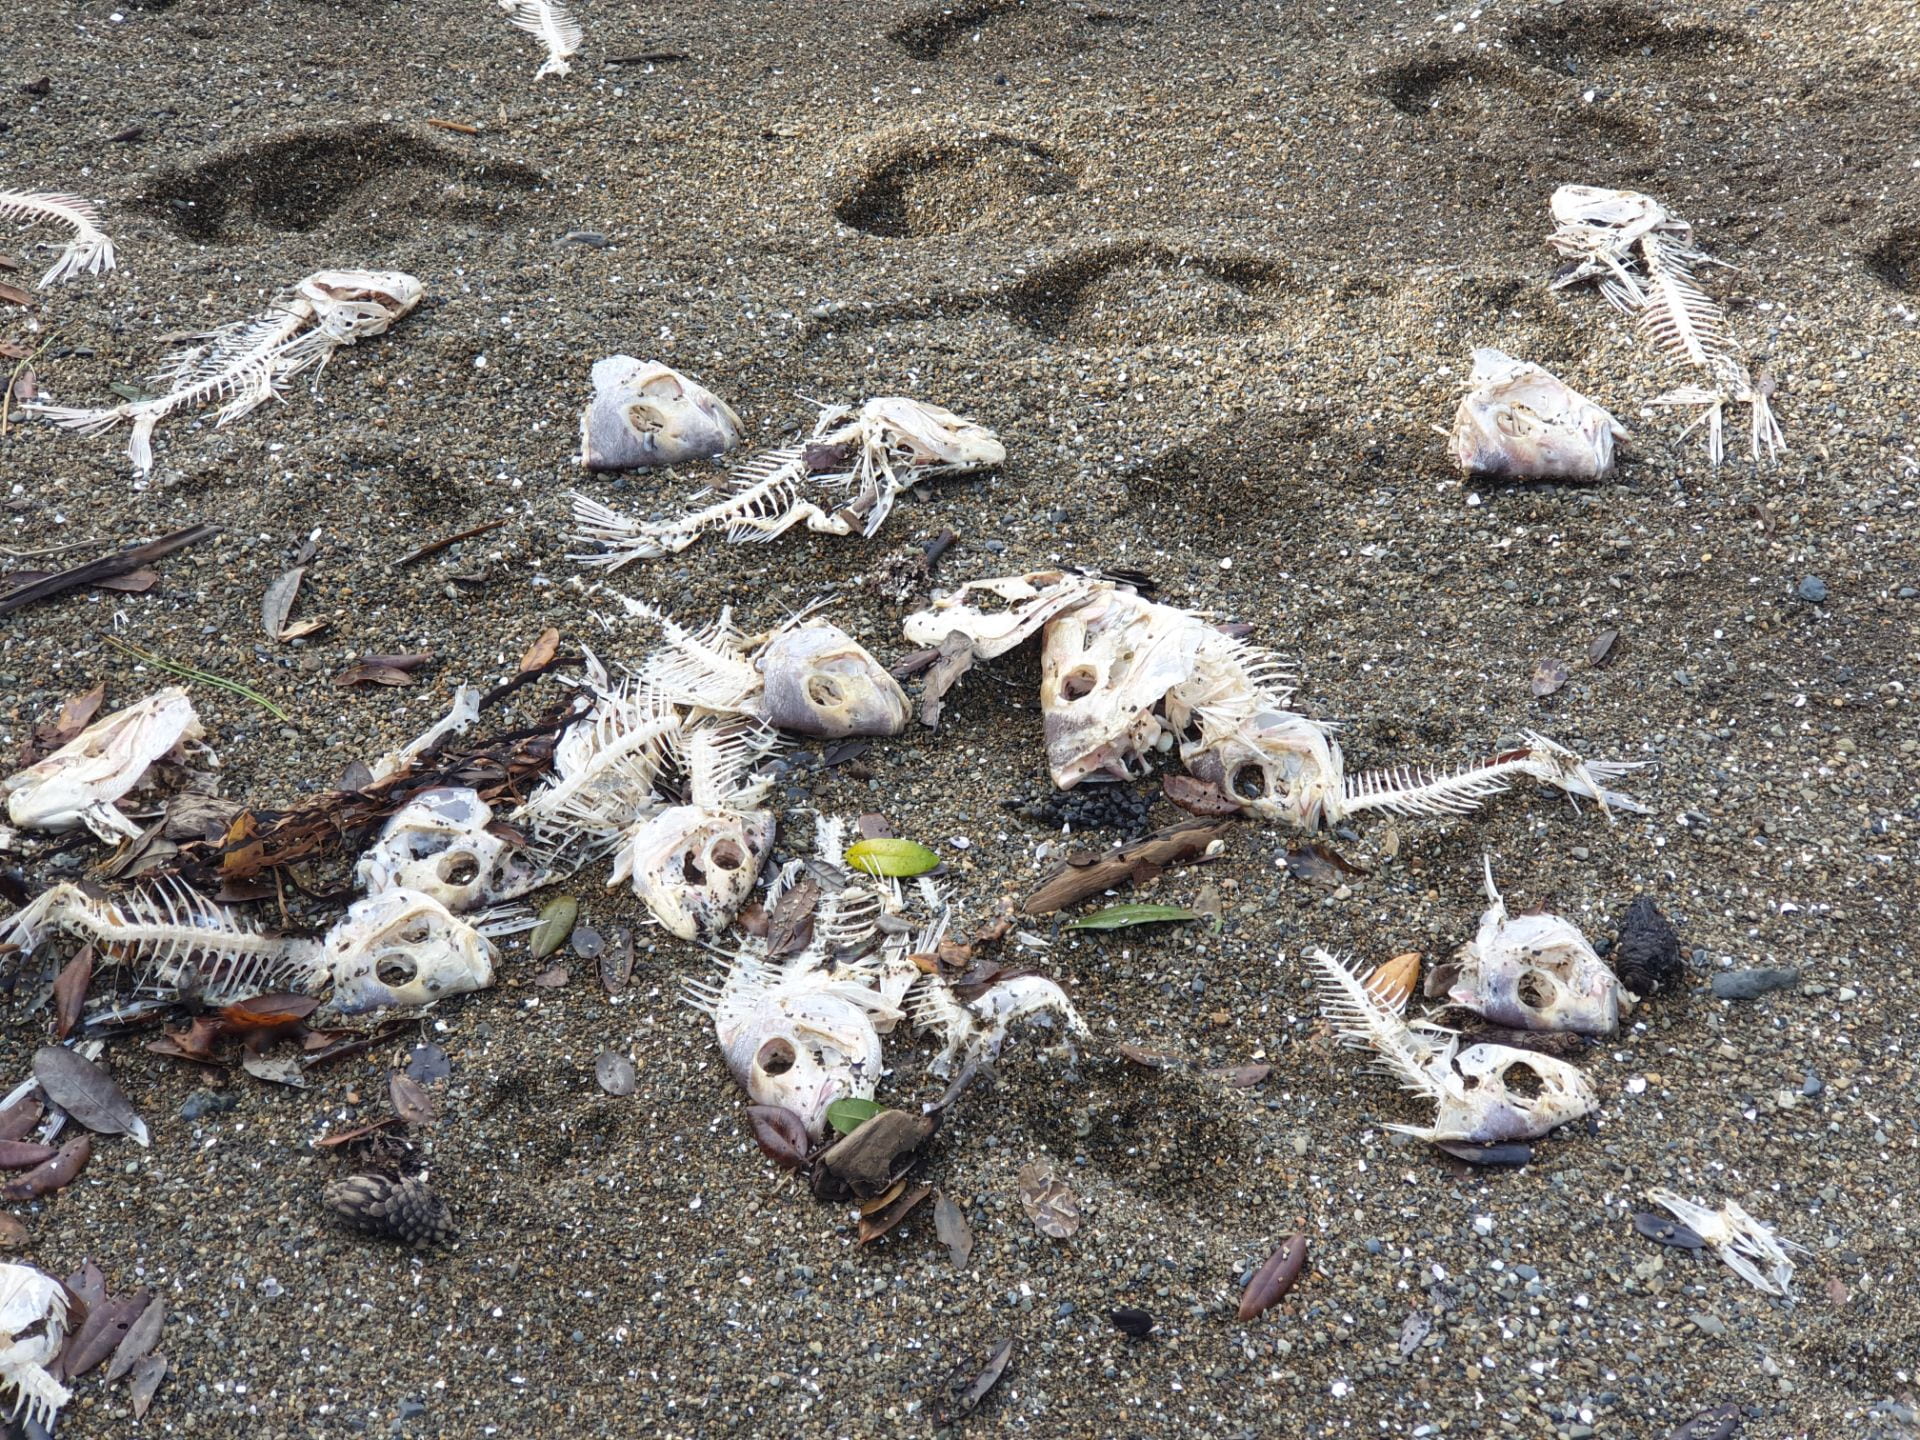 Fish heads and skeletons discarded on sand